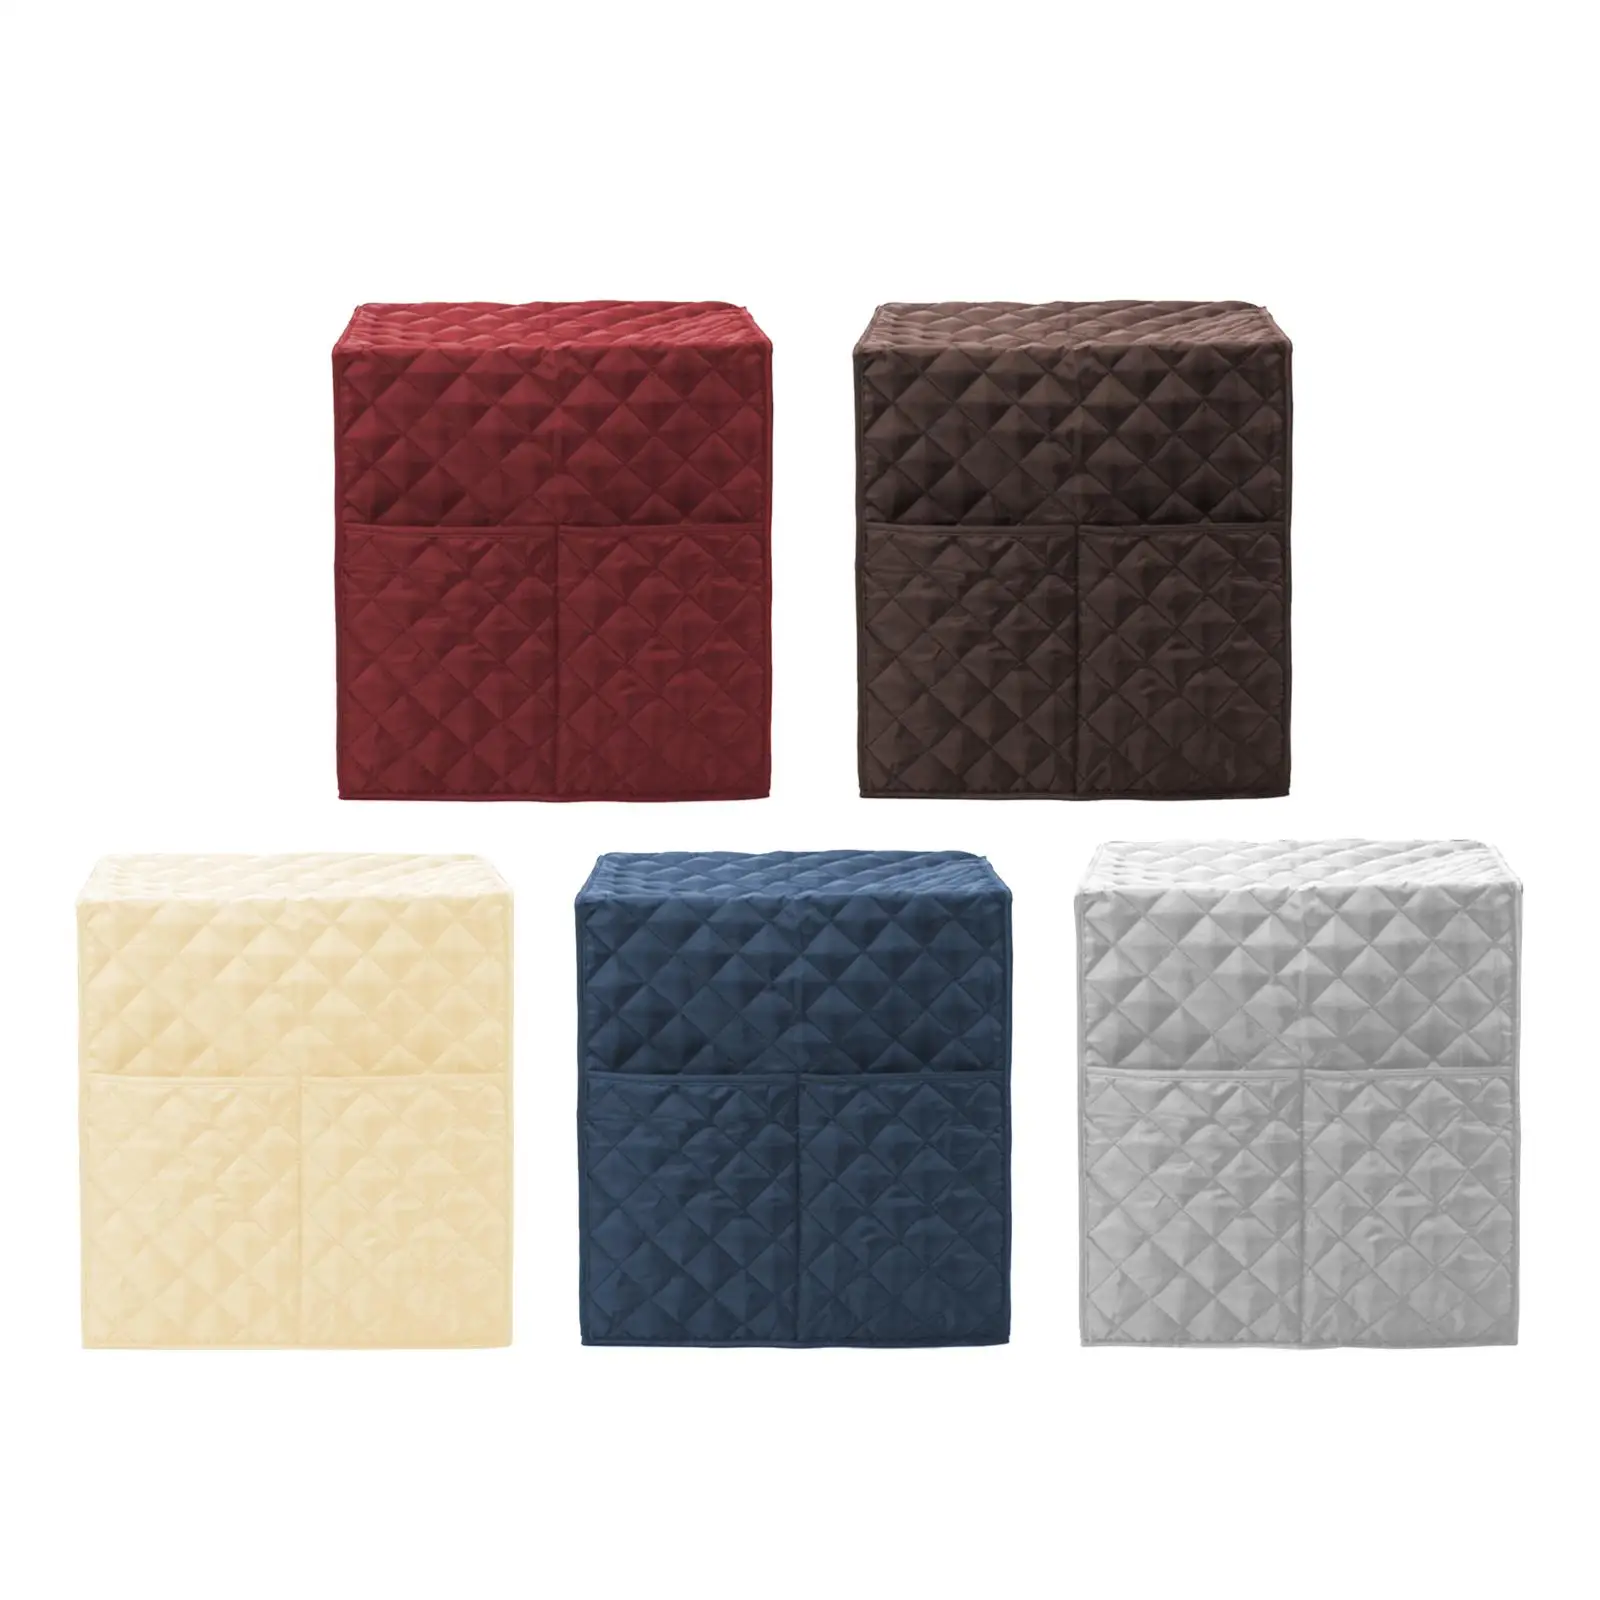 Espresso Machine Quilted Protective Cover Machine Washable Mixer Accessories Coffee Making Machine Cover for Restaurant Bar Cafe